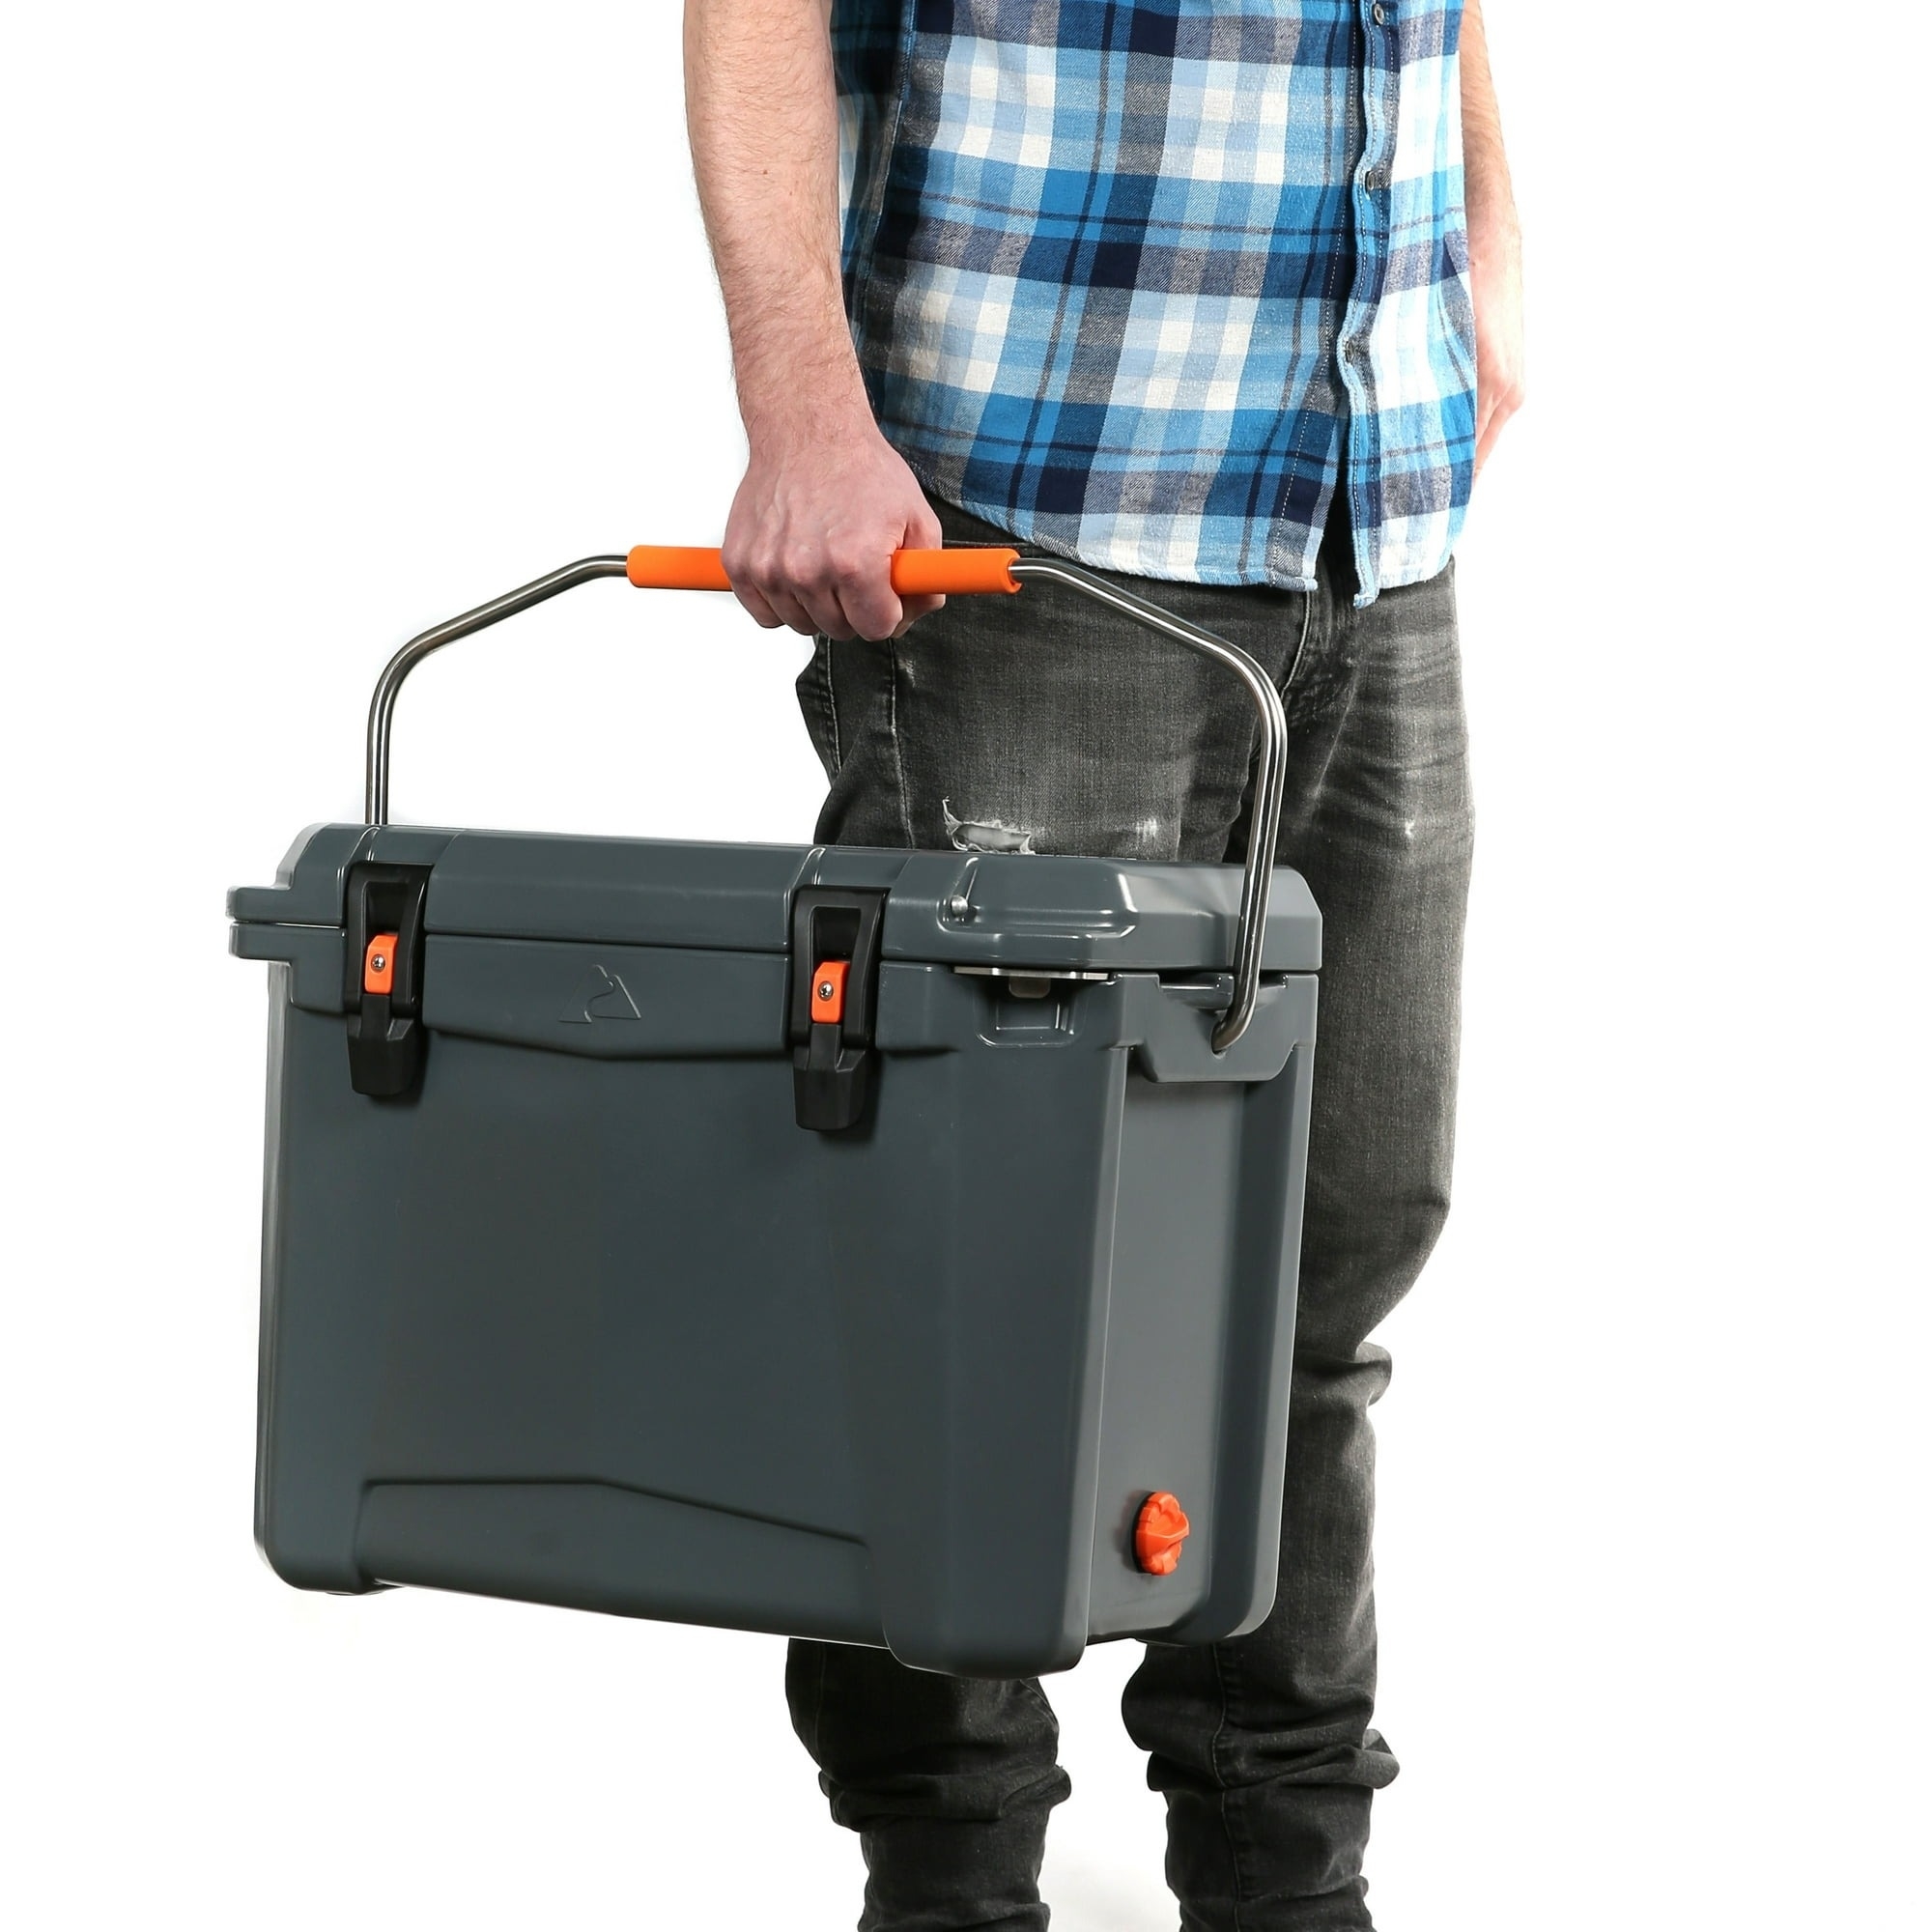 Model holding a grey cooler with an orange handle.